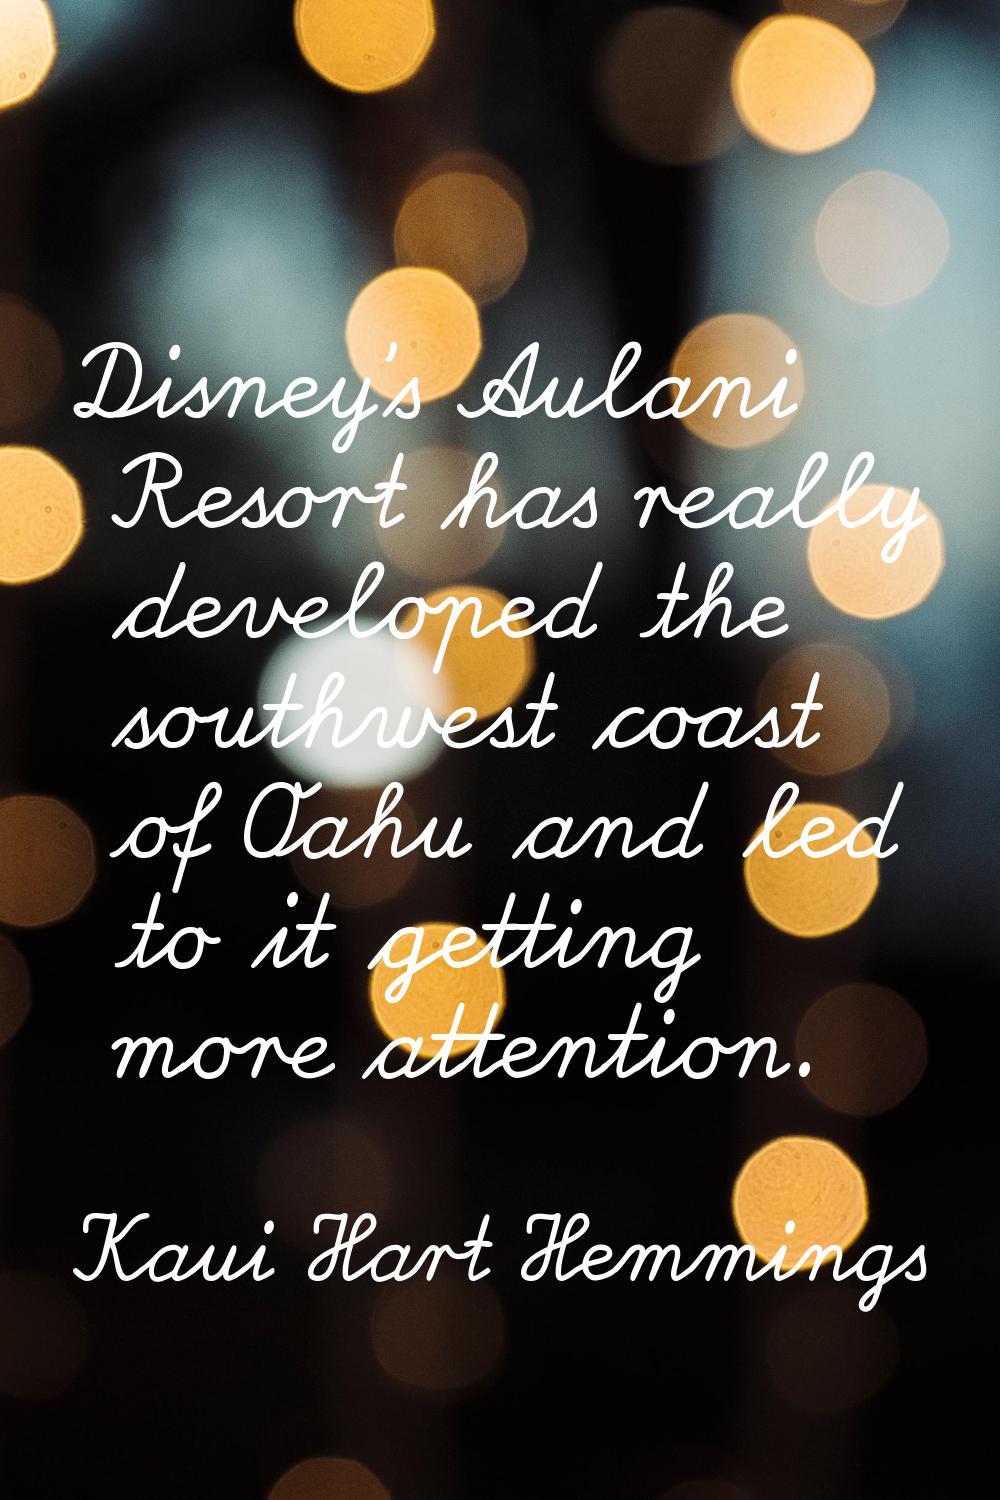 Disney's Aulani Resort has really developed the southwest coast of Oahu and led to it getting more 